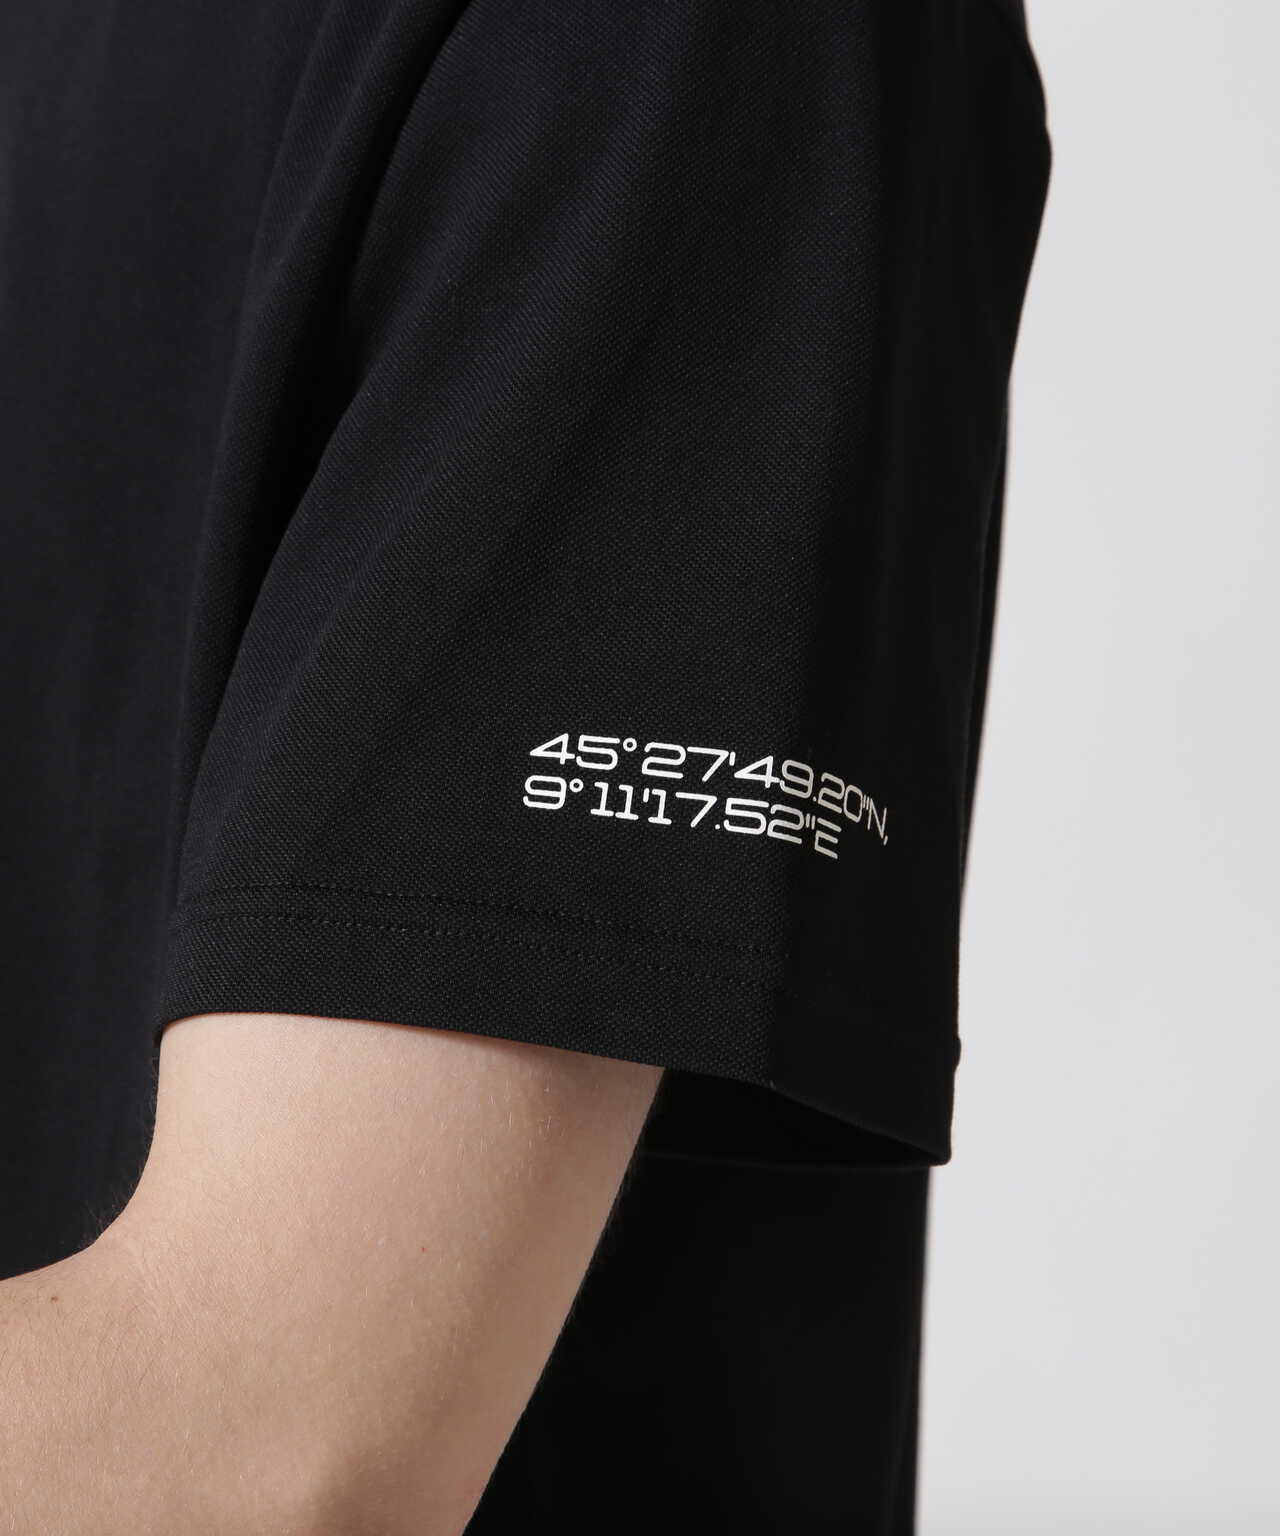 SY32 by SWEETYEARS /MOCK NECK CRIMPING TEE | ROYAL FLASH